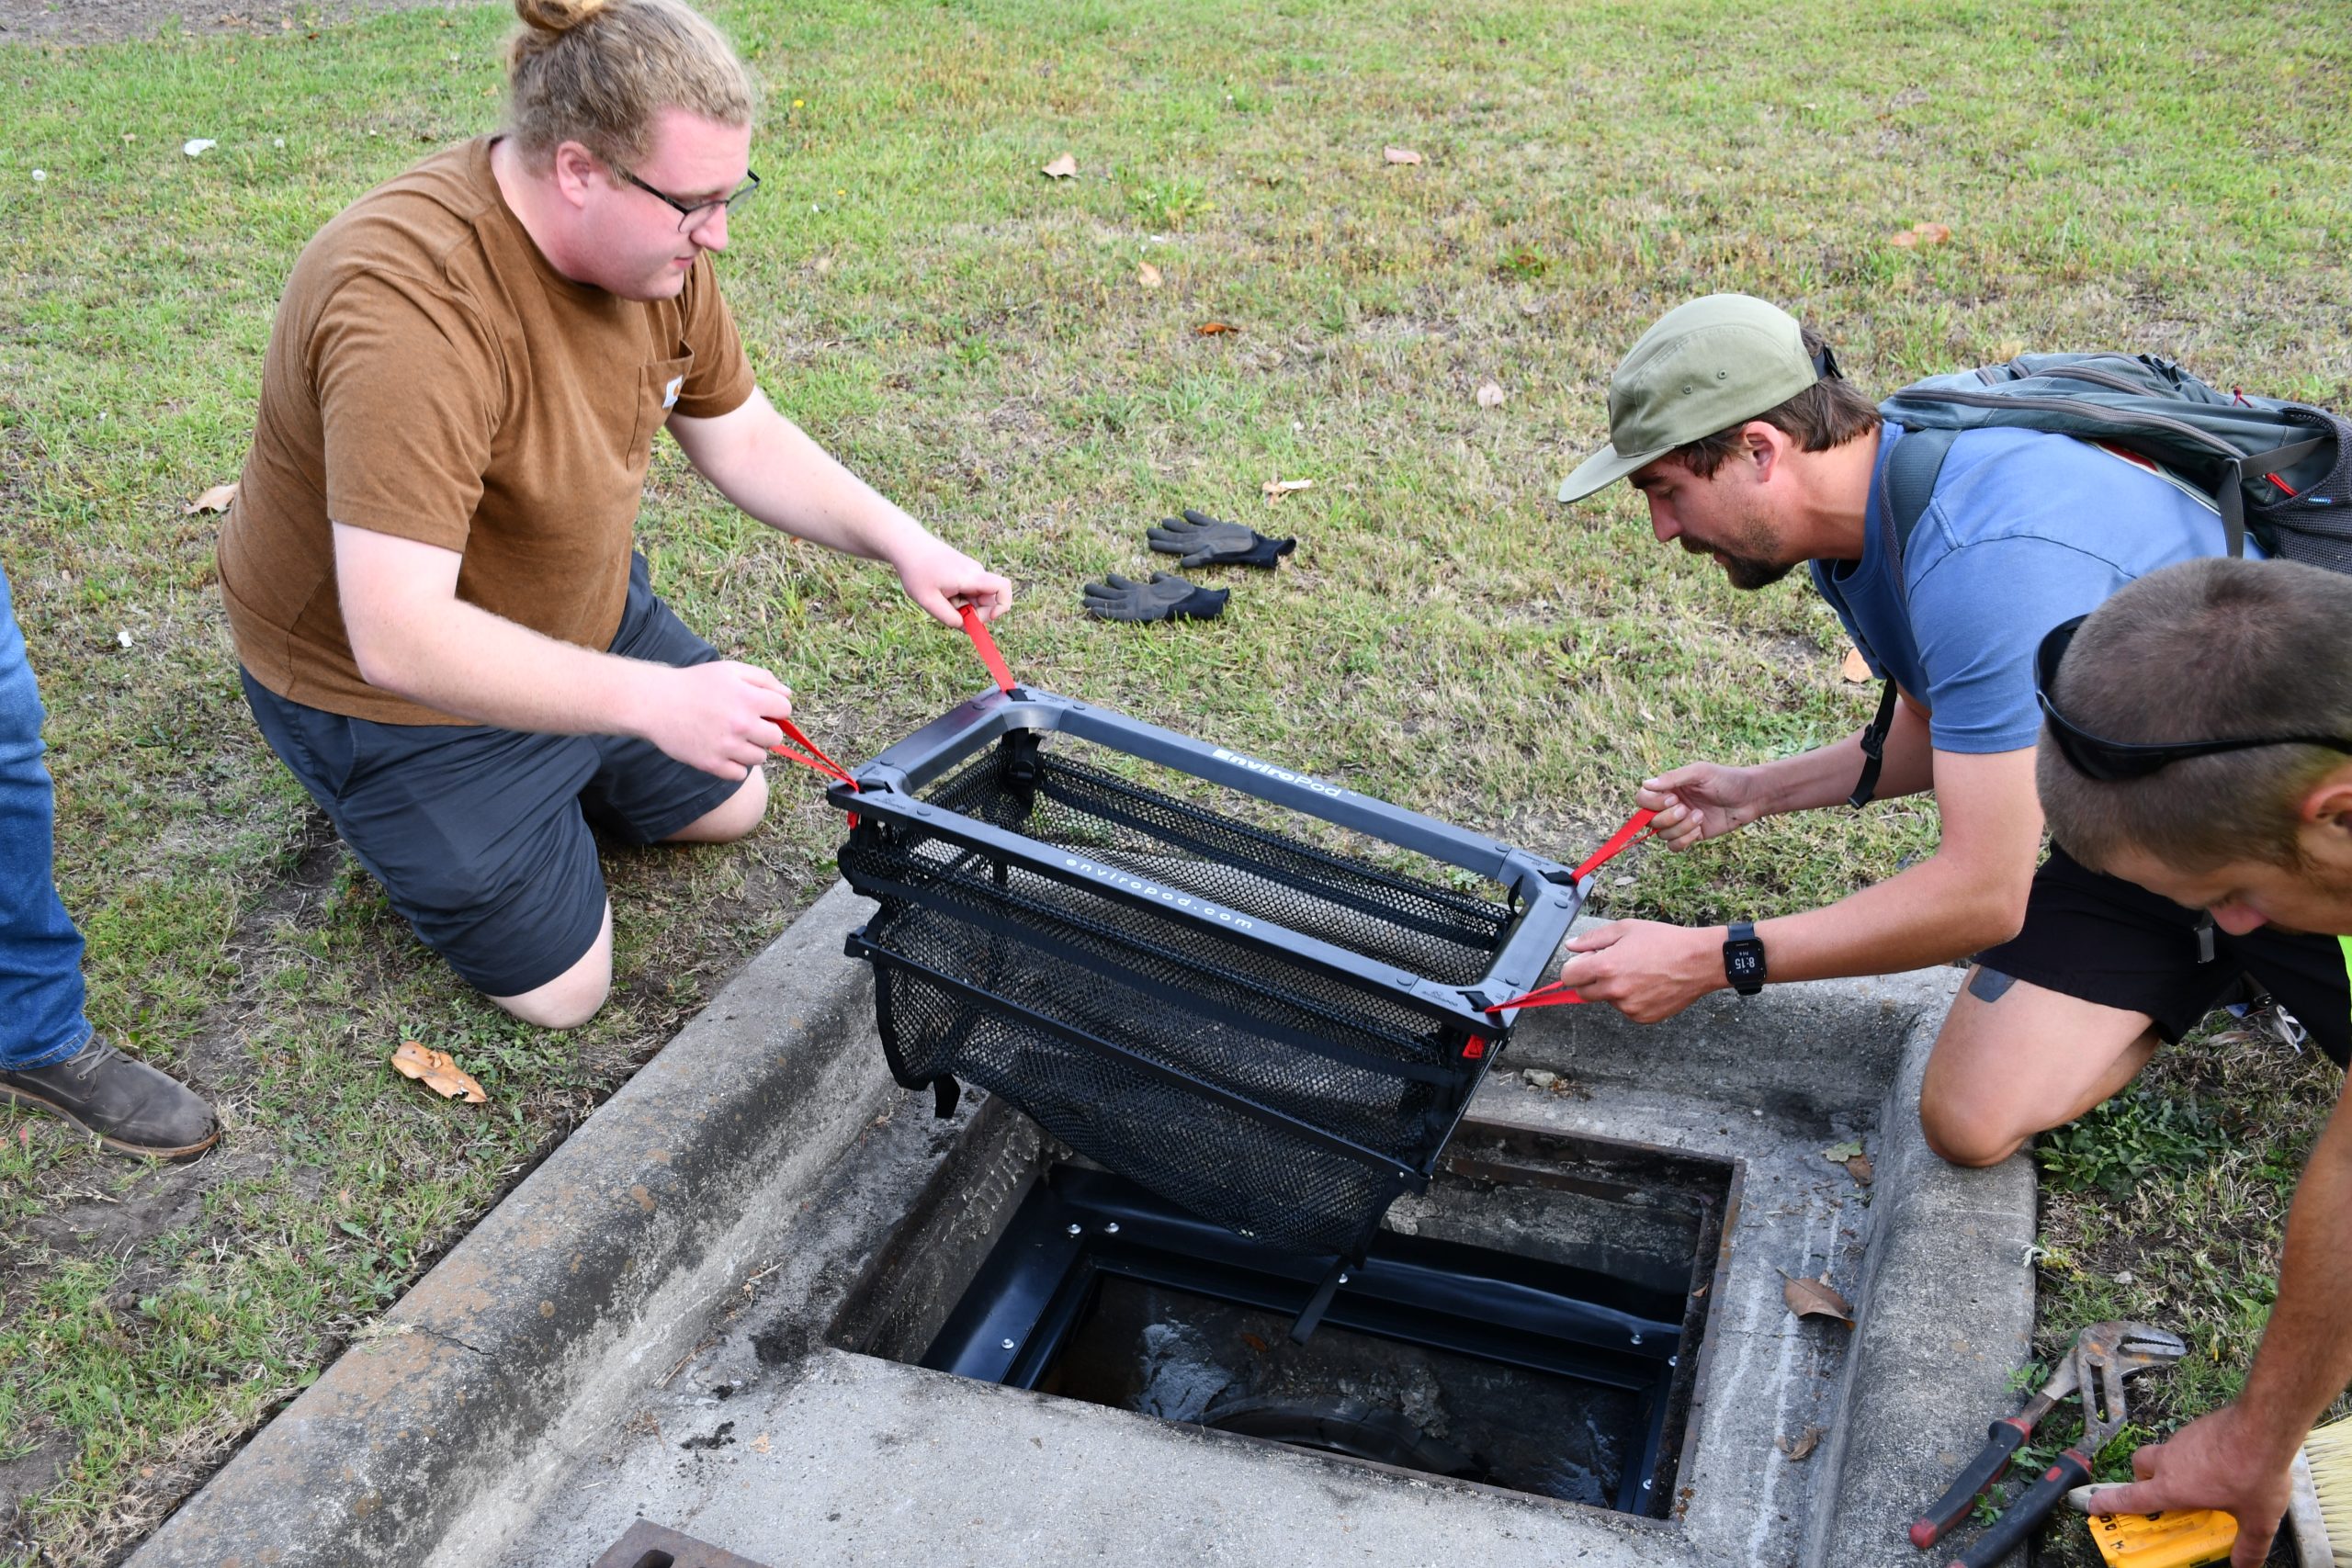 Shows two men kneeling as they place a black basket with mesh netting, called a "Litta Trap," into a concrete catch basin to trap small-sized debris before it enters local waterways